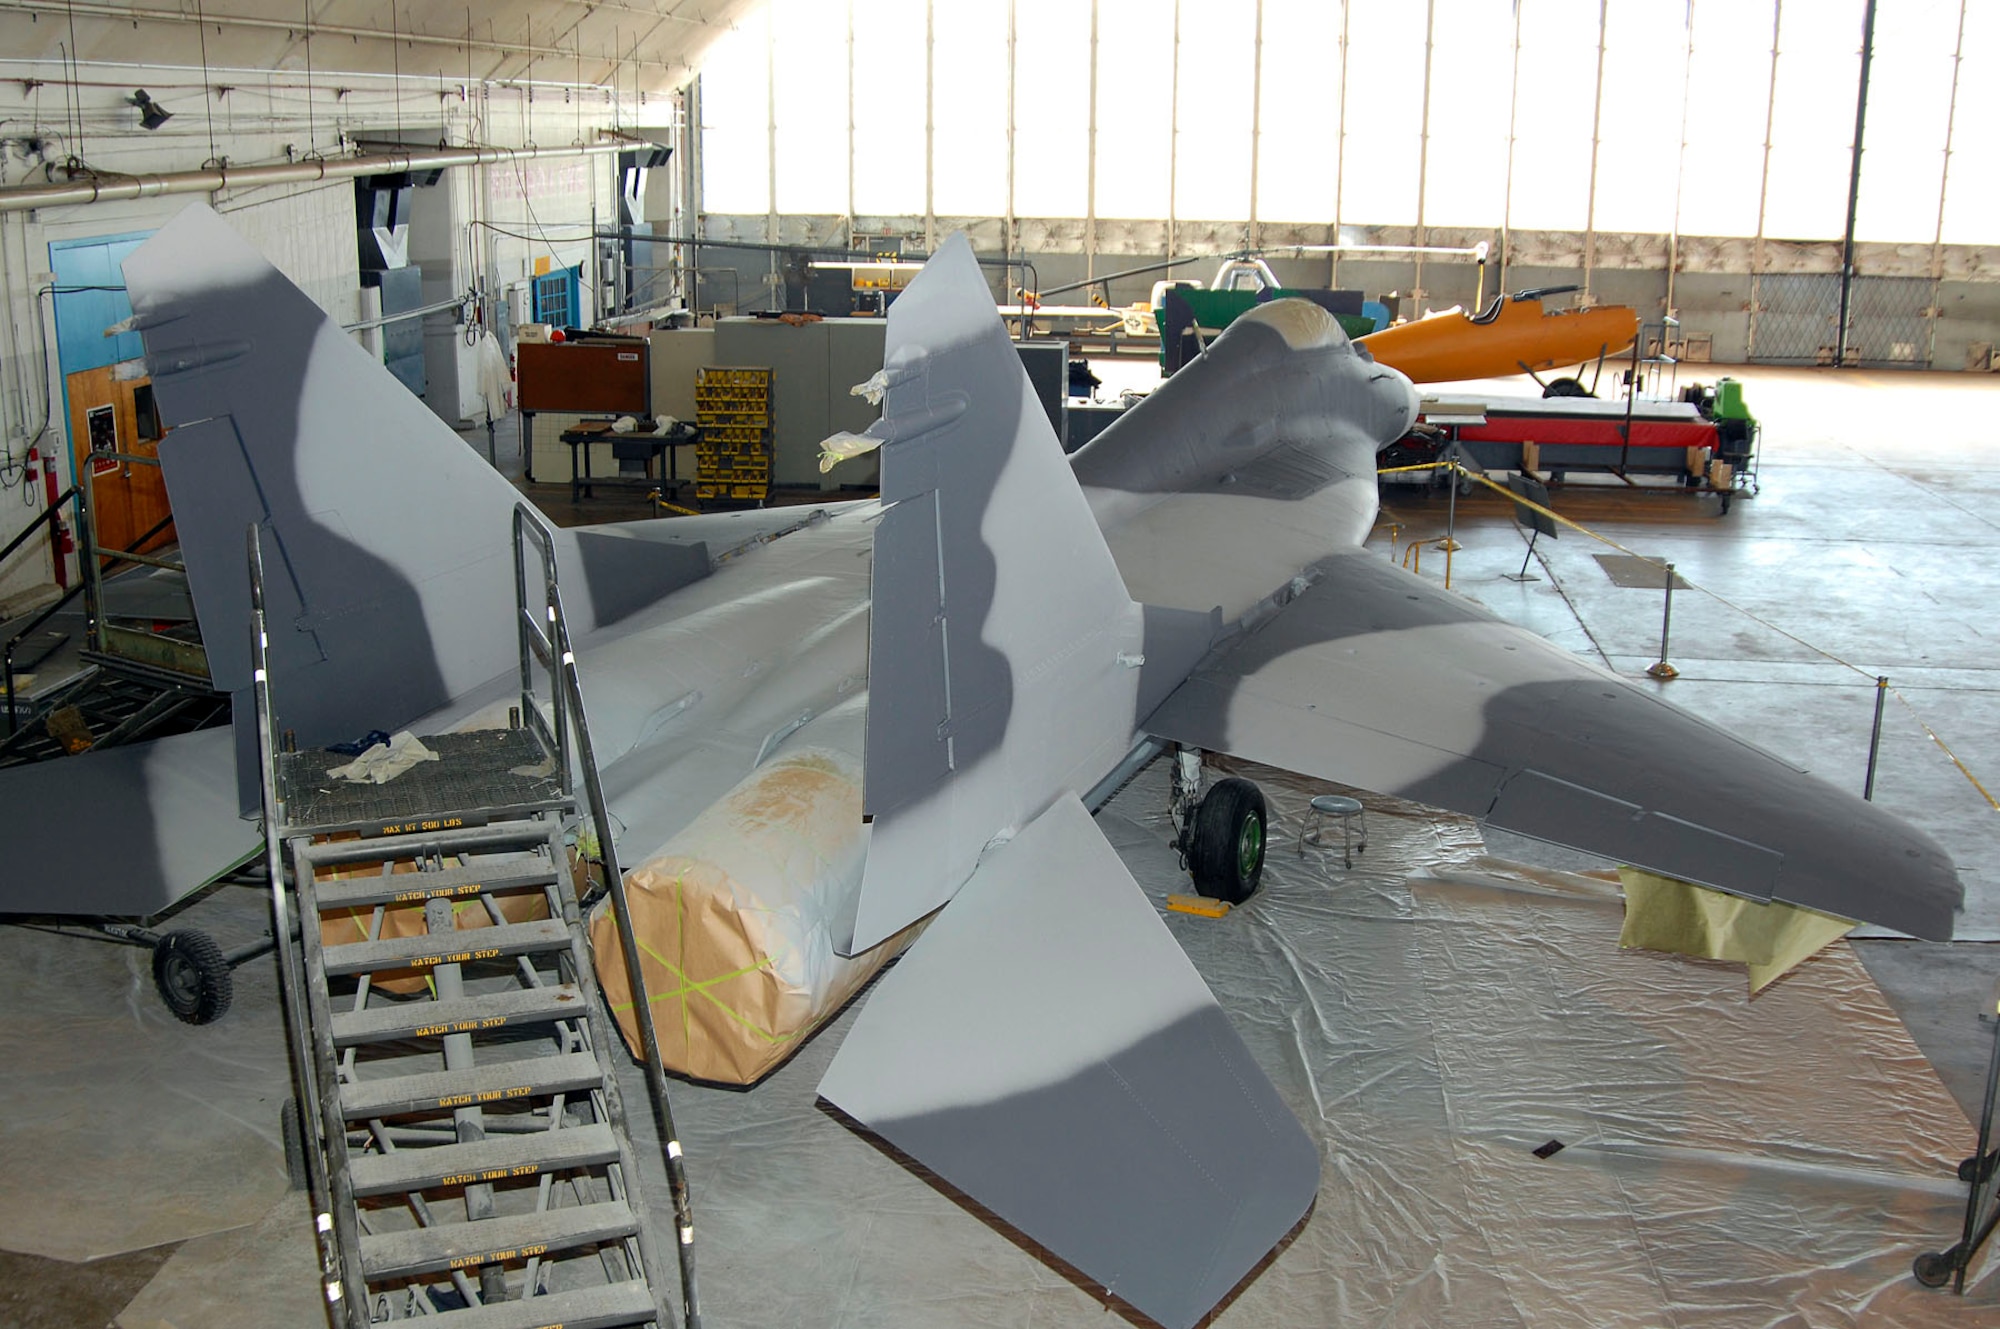 DAYTON, Ohio (02/2007) - The MiG-29A undergoing restoration at the National Museum of the U.S. Air Force. (U.S. Air Force photo by Ben Strasser)